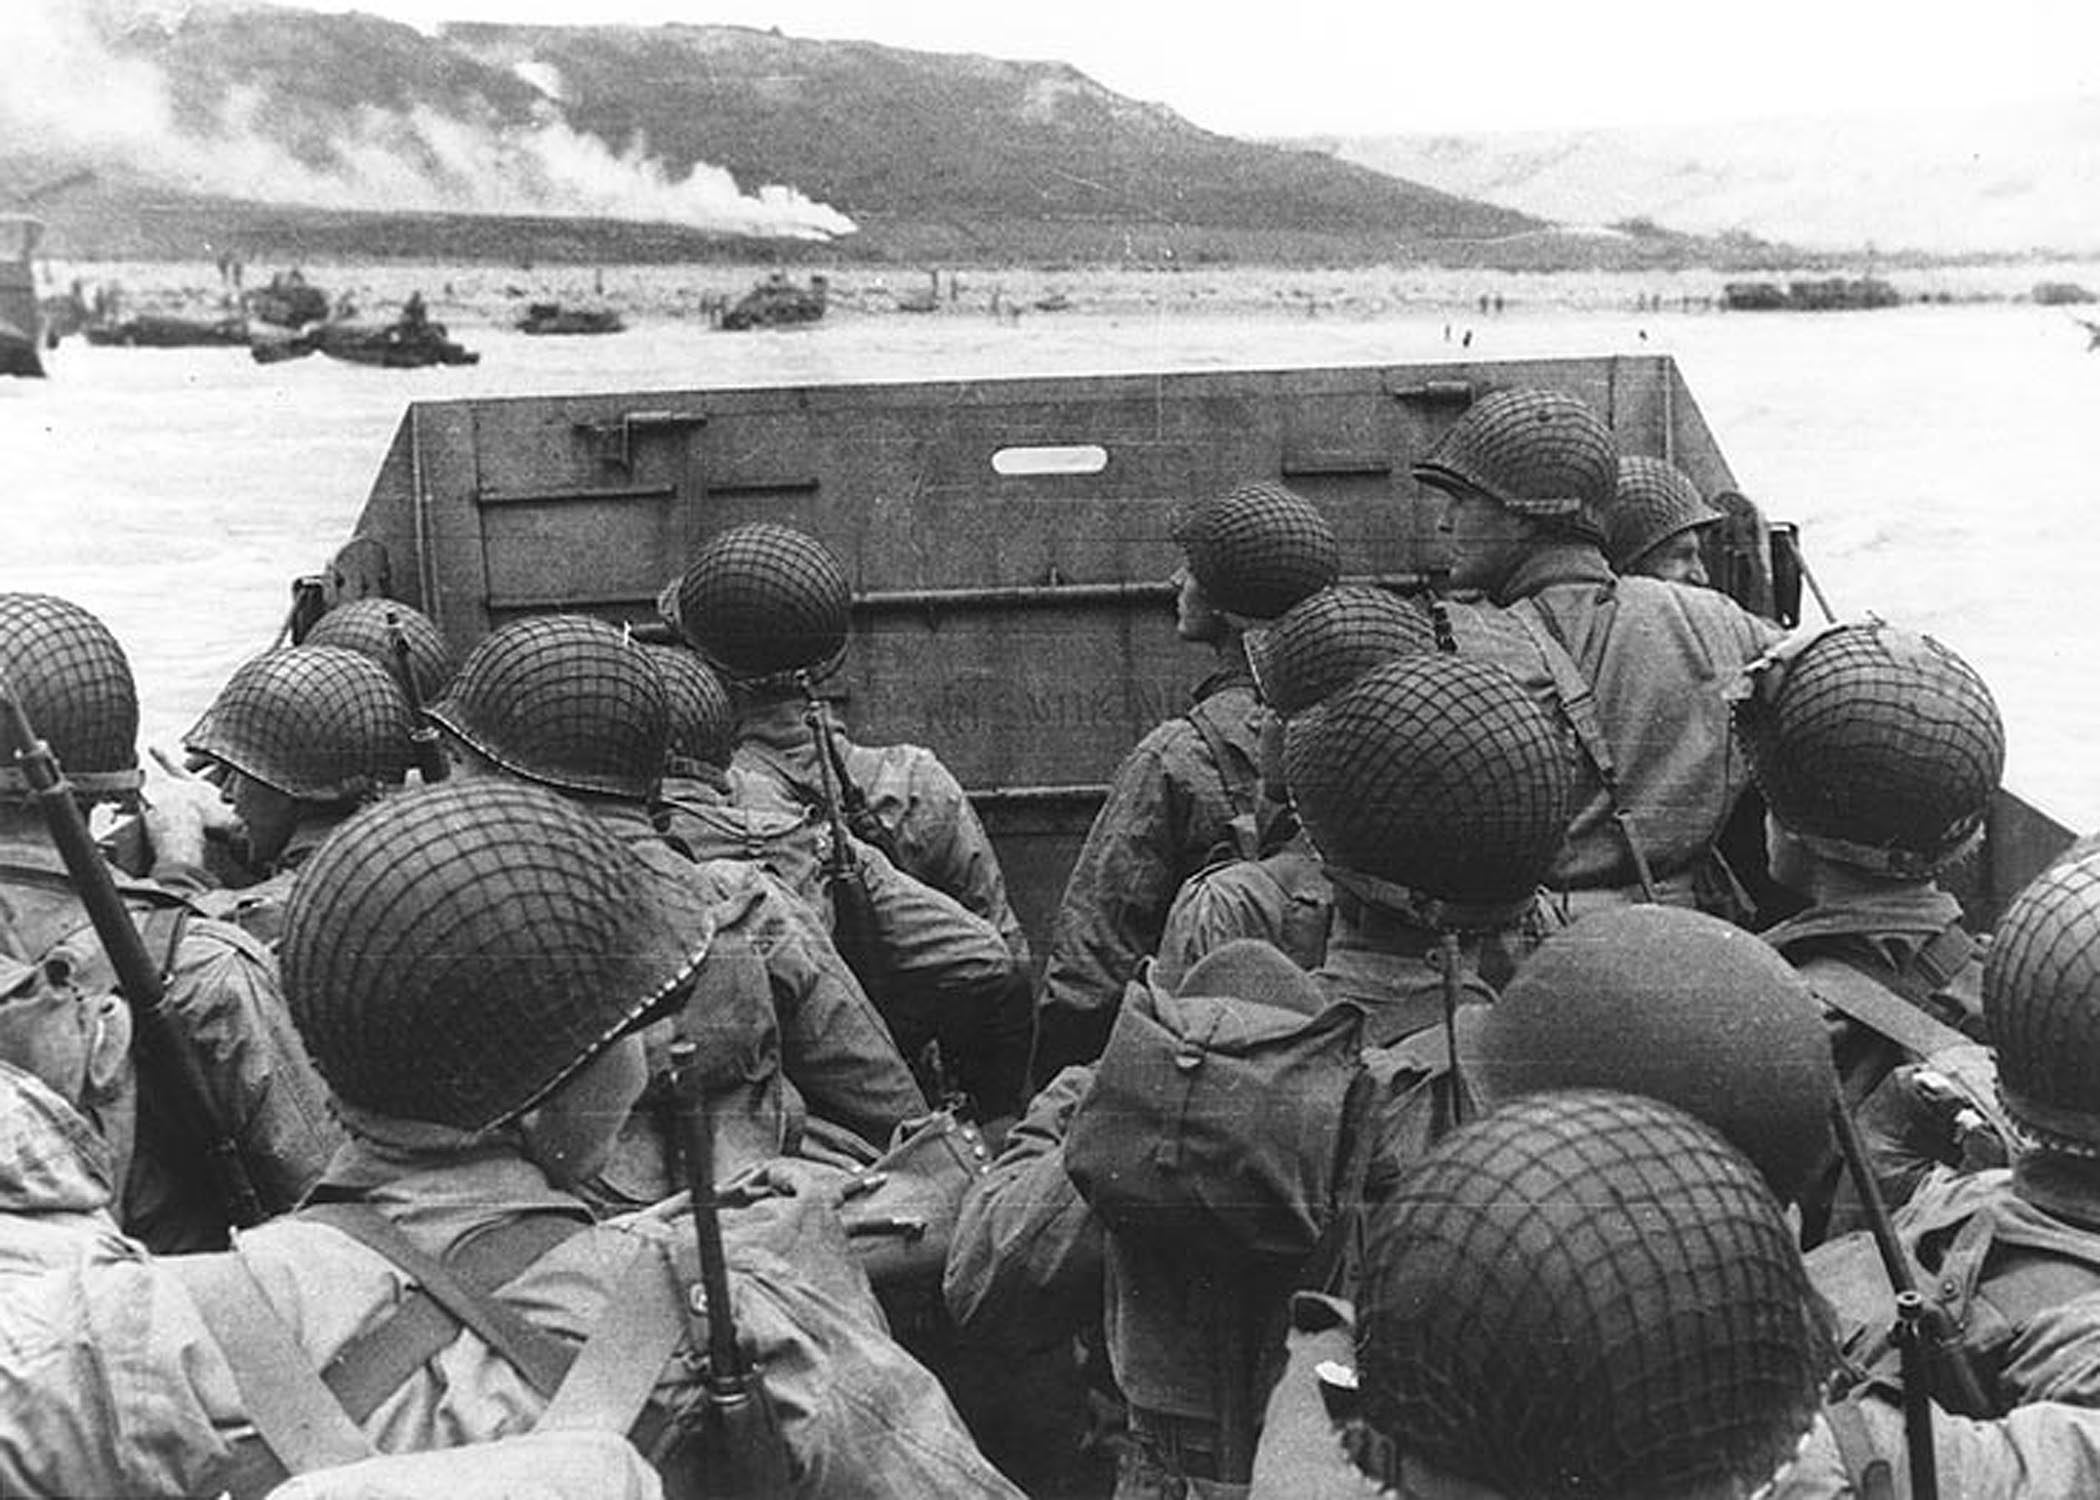 Troops in an LCVP landing craft approaching Omaha Beach, Normandy, FR. D-Day. June 6th, 1944